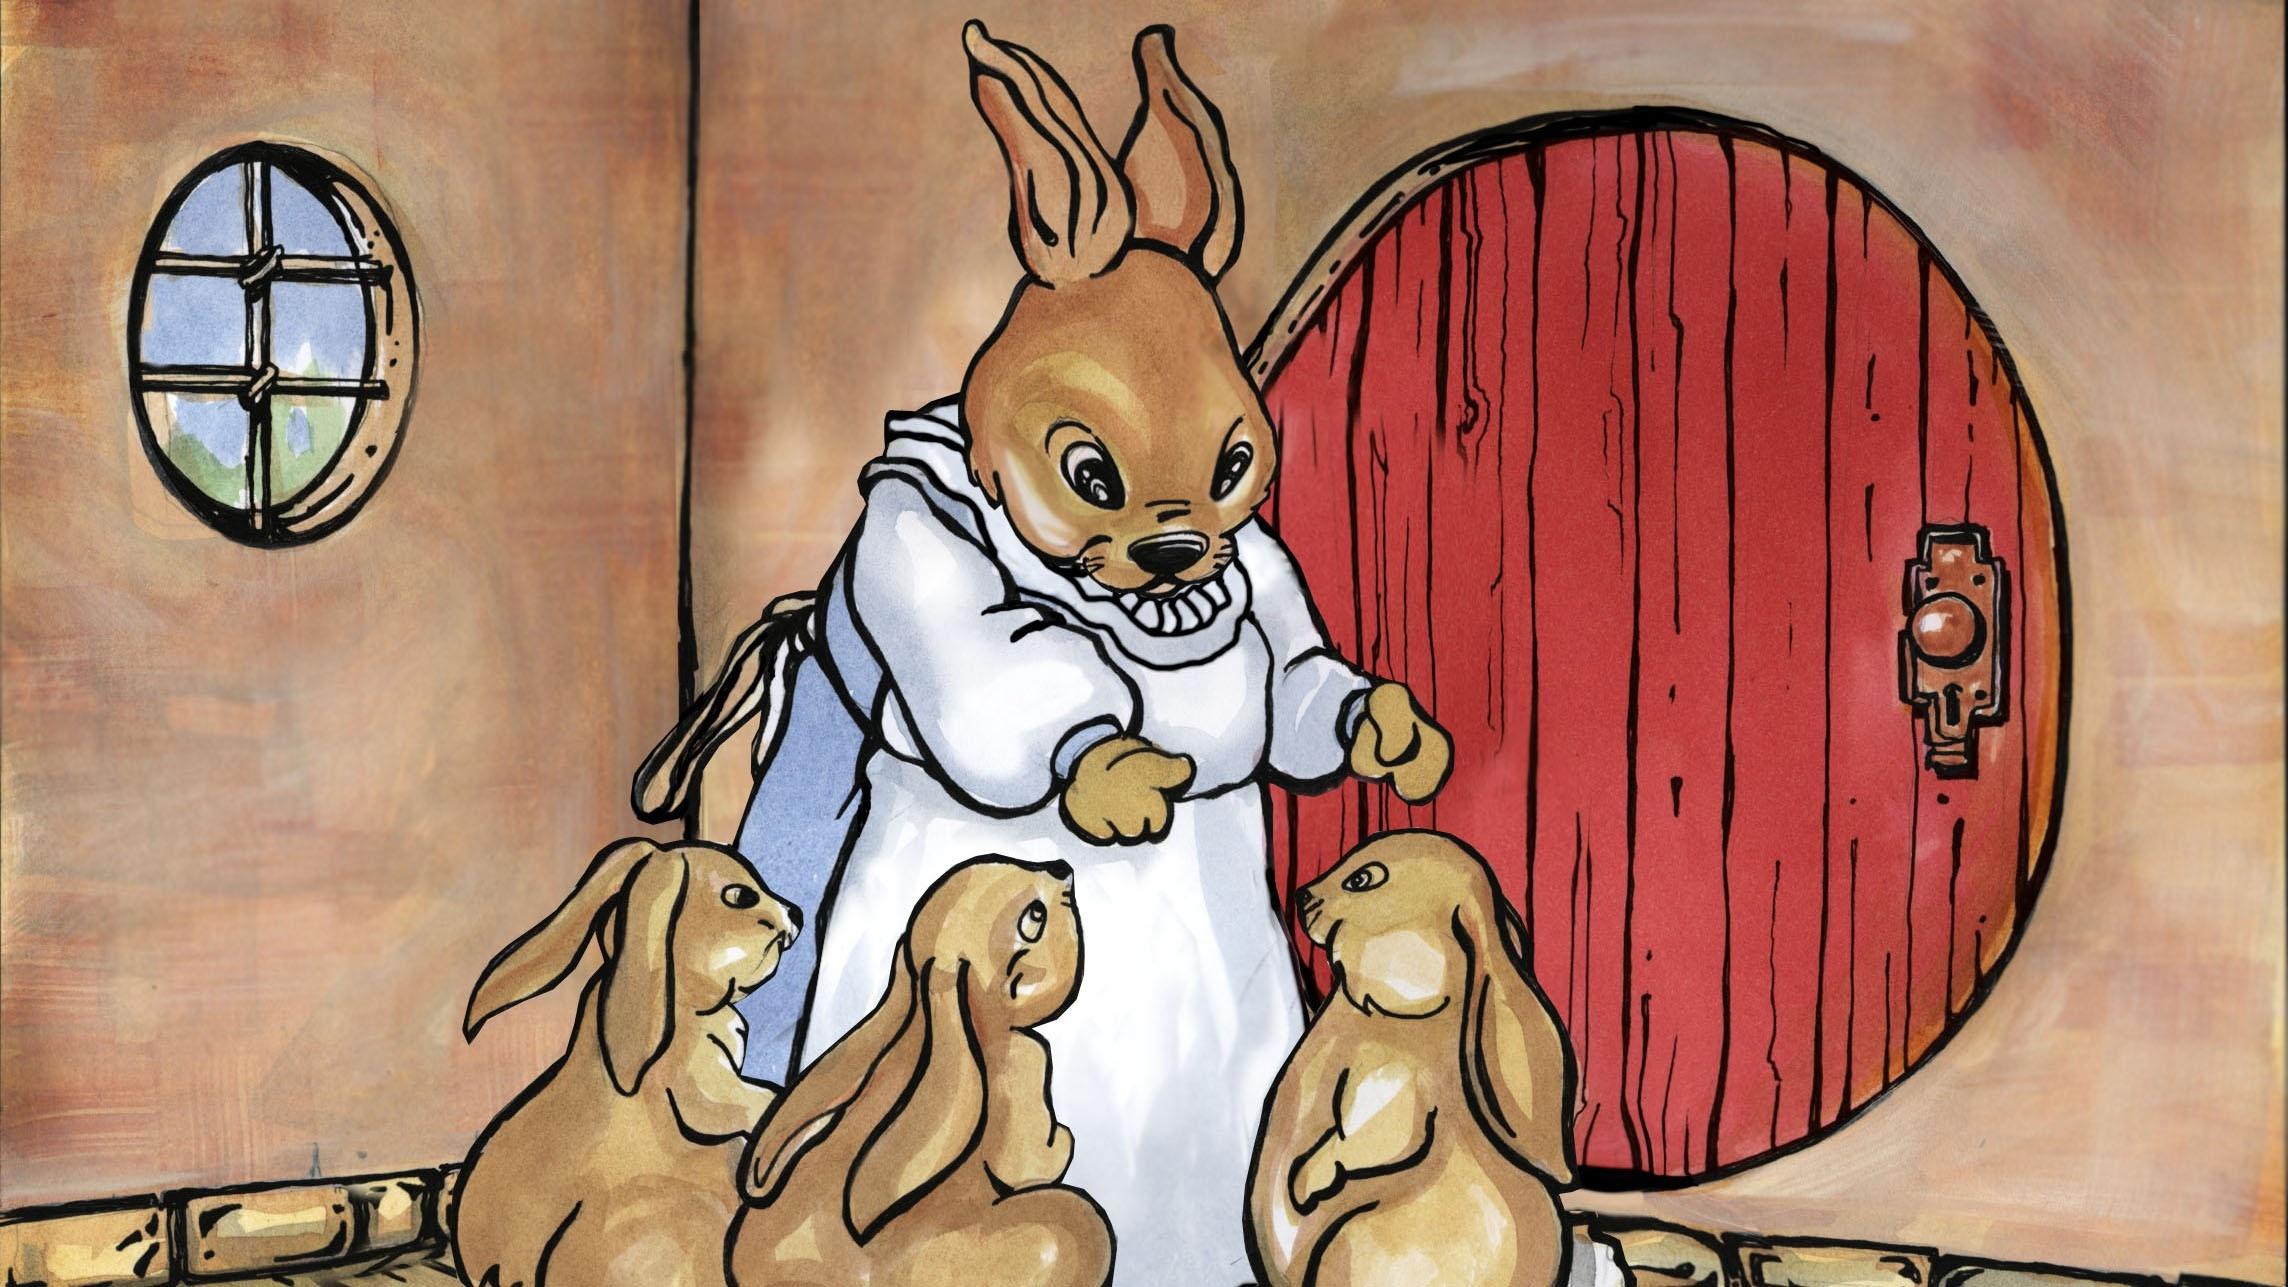 A cartoon rabbit mother stands over three small rabbit children in front of a red door.